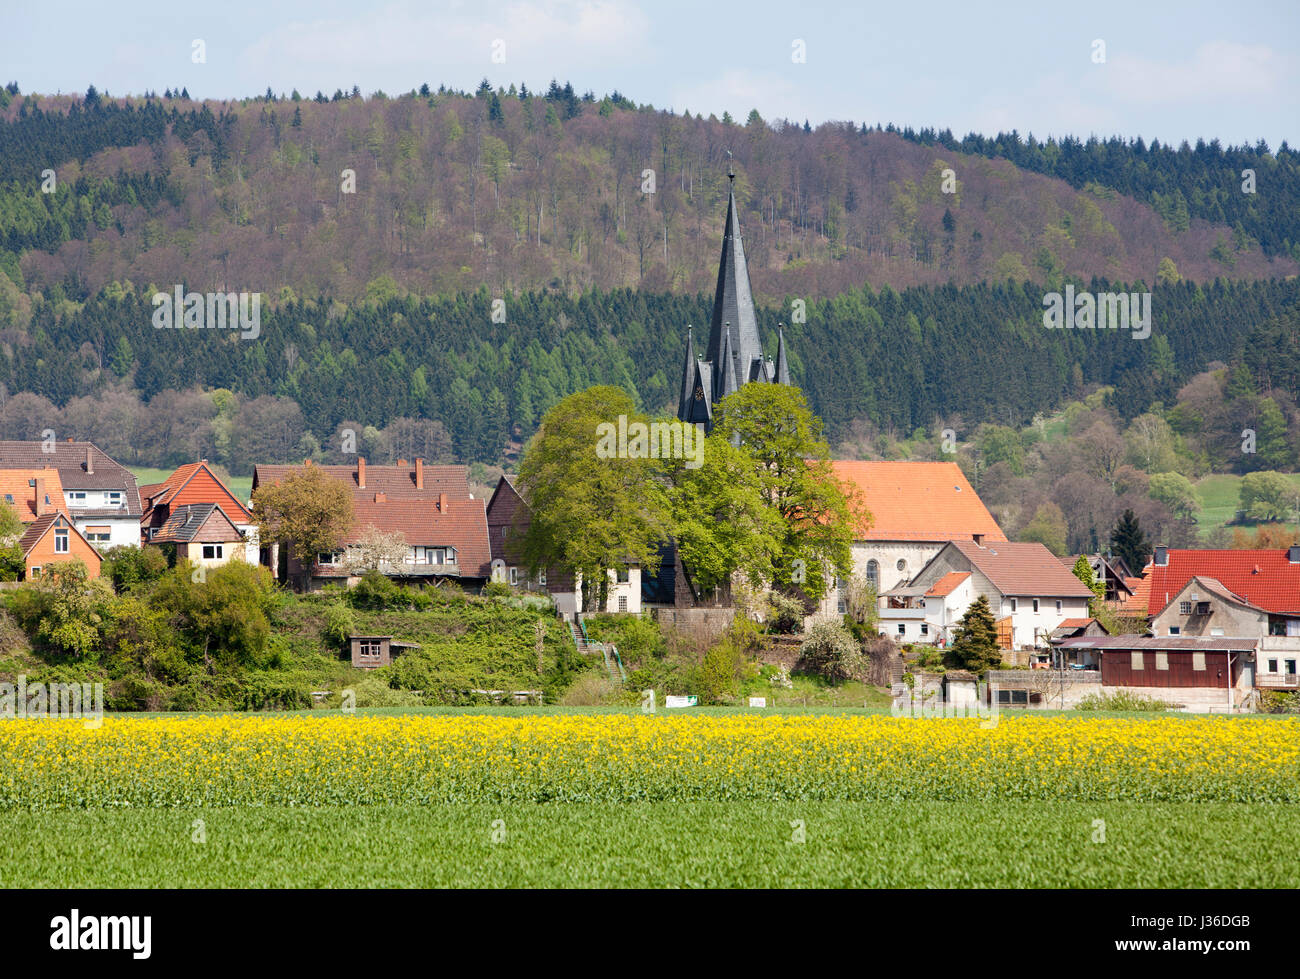 Curch and village of Bodenfelde, district of Northeim, Lower Saxony, Germany Stock Photo